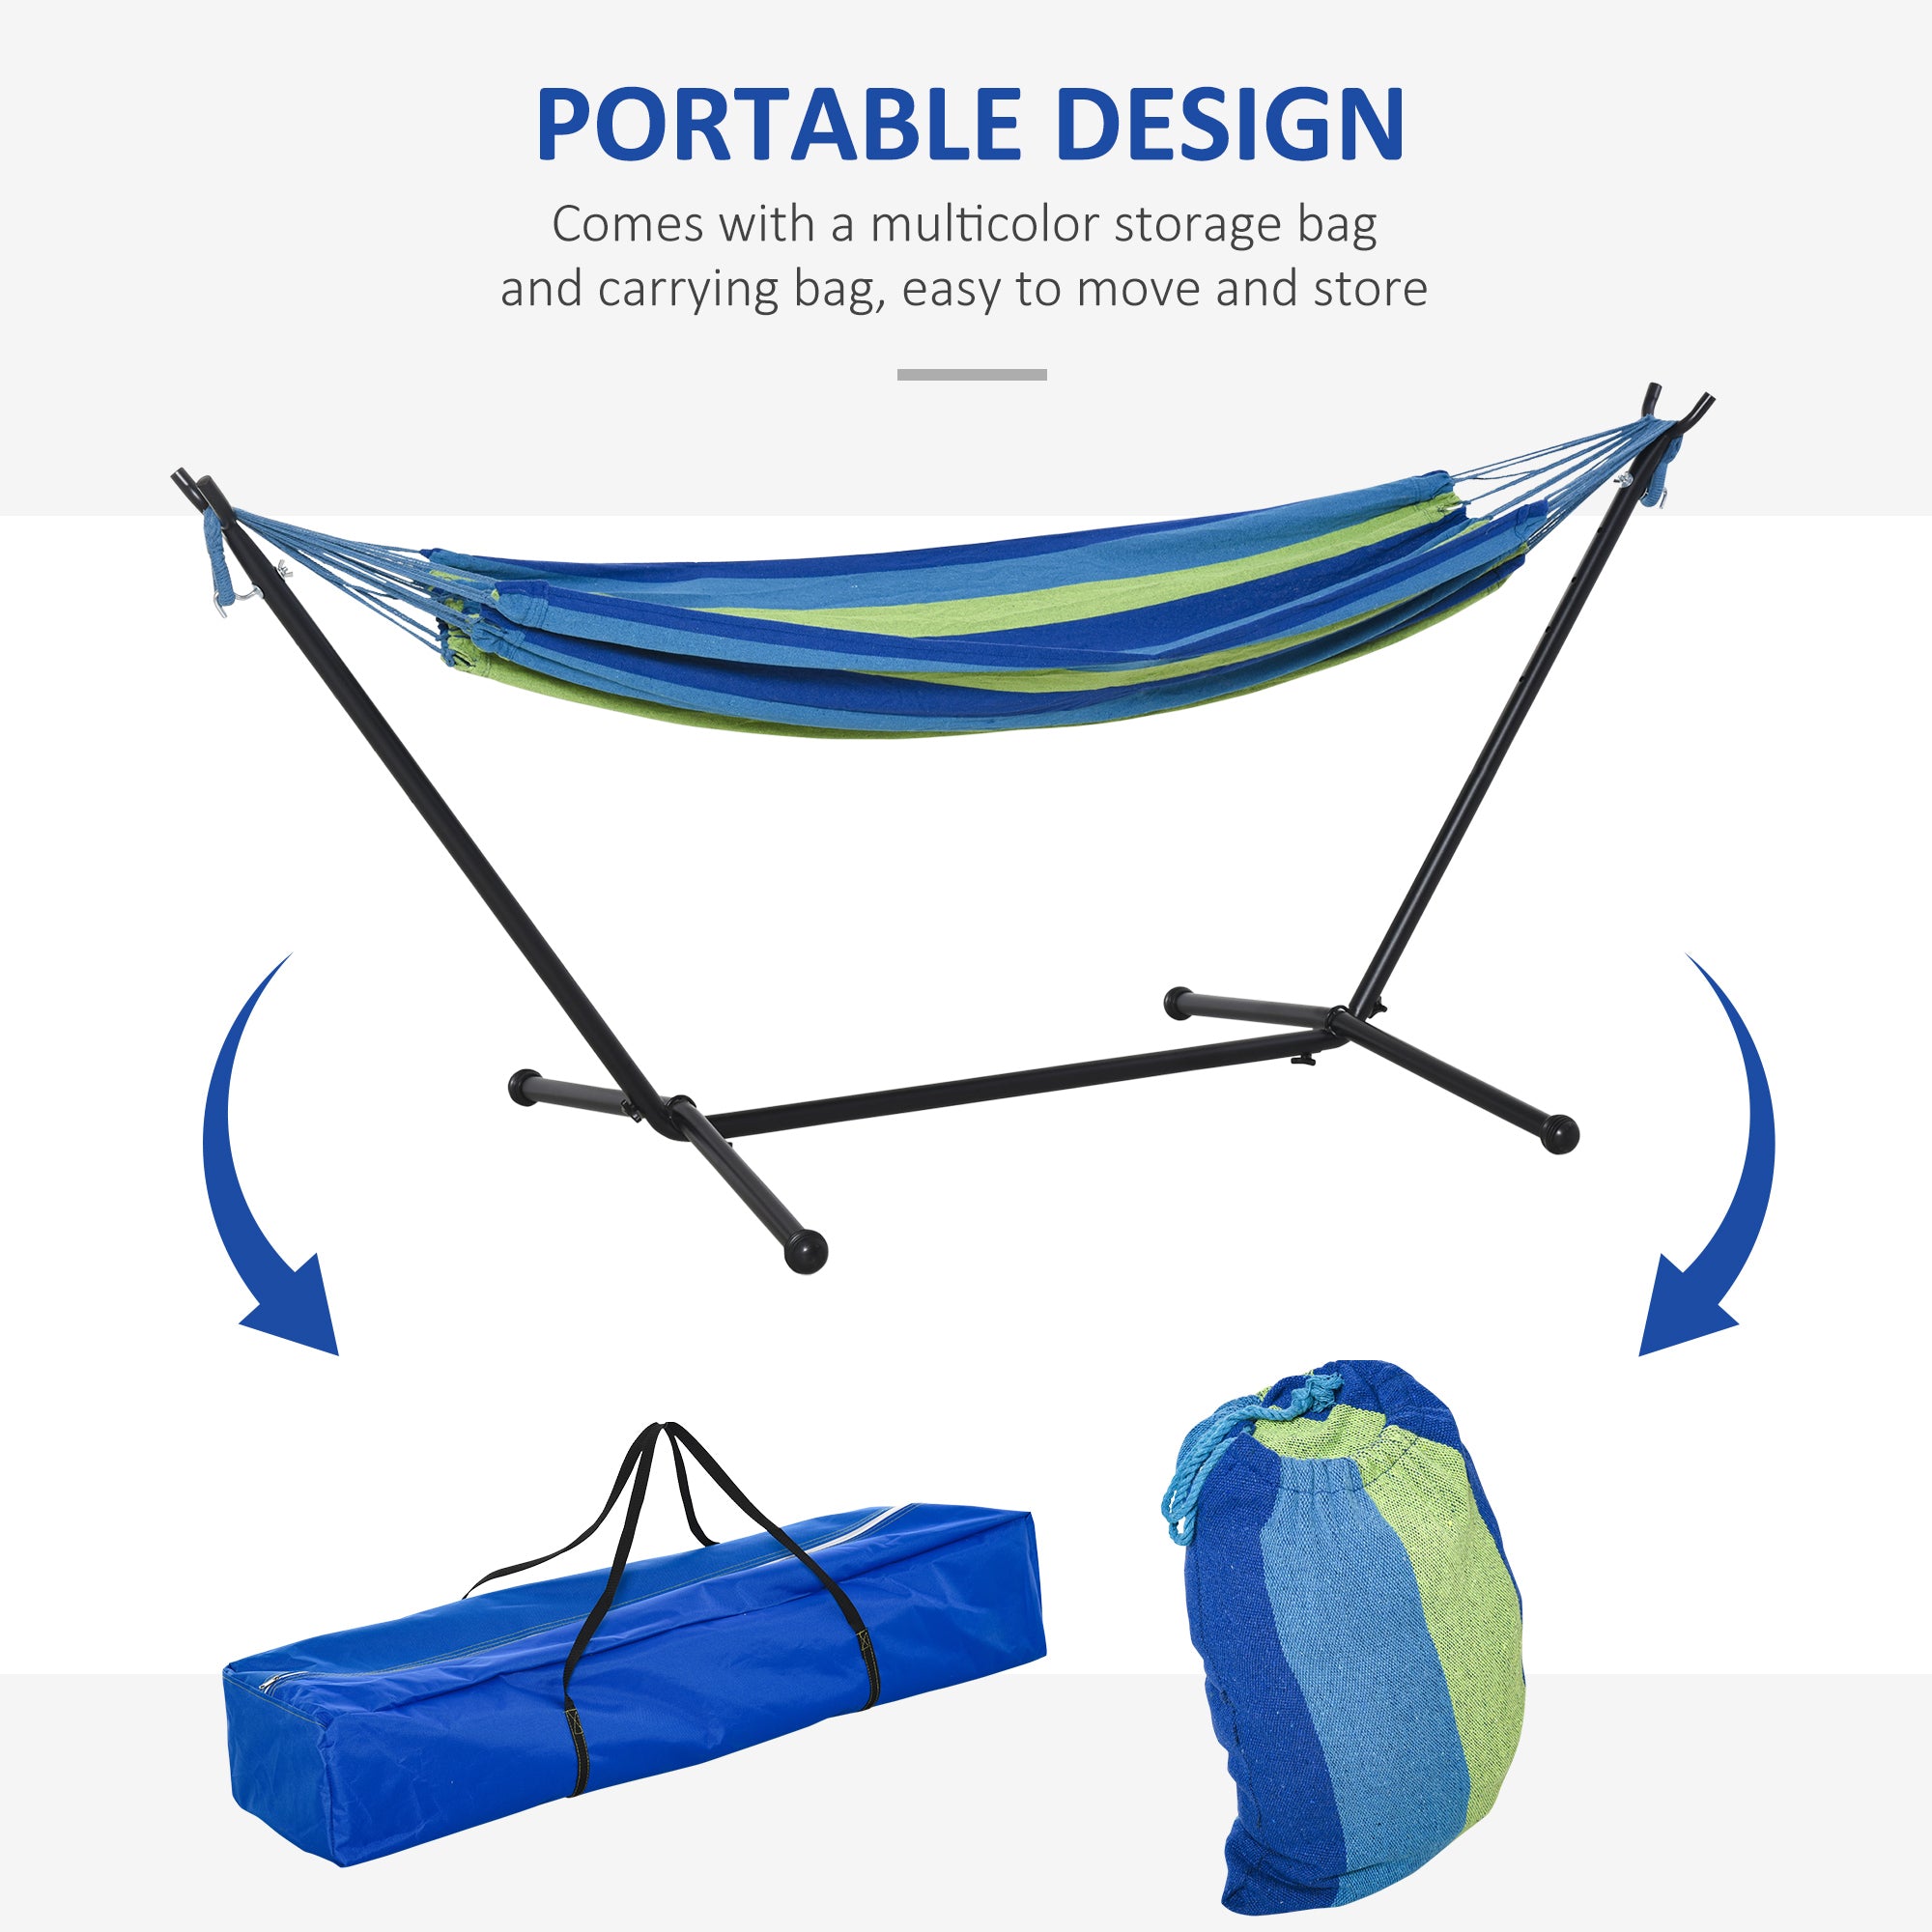 Outsunny 294 x 117cm Hammock with Stand Camping Hammock with Portable Carrying Bag, Adjustable Height, 120kg Load Capacity, Green Stripe - Inspirely